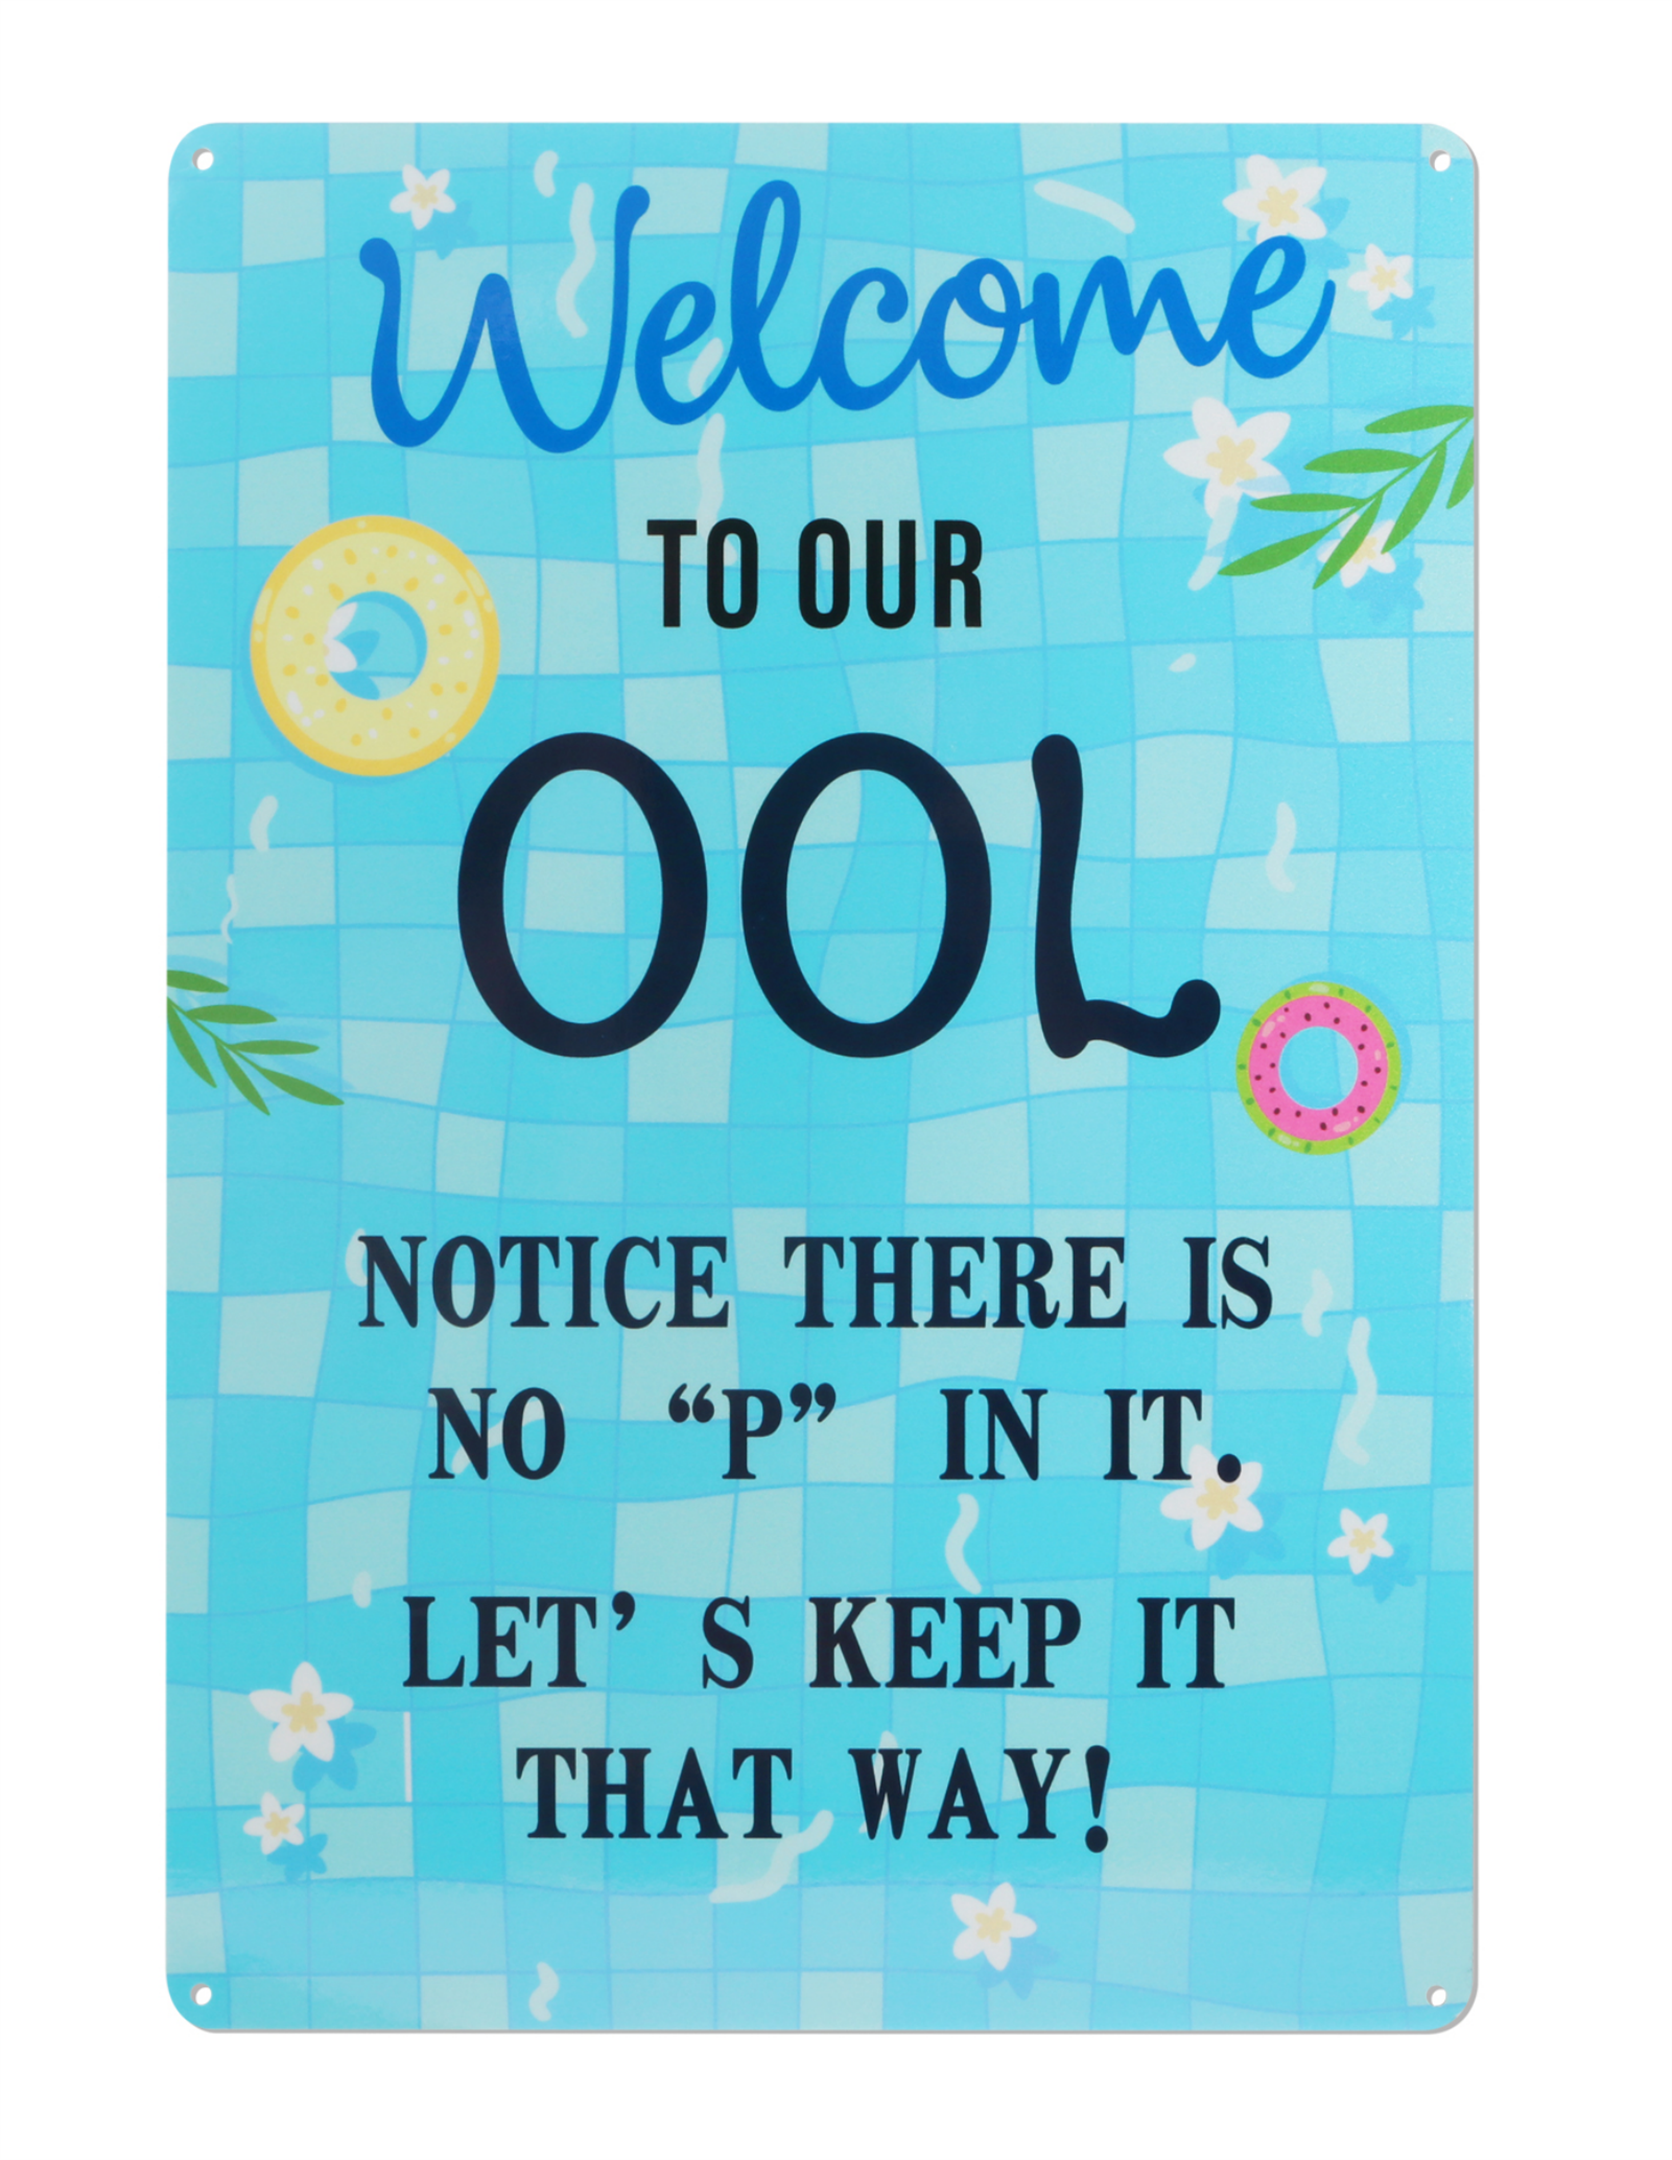 THTEN 14 x 10" Welcome To Our Ool - Notice There Is No P In It, Let's Keep It That Way¡± Funny Pool Metal Sign, Reflective Aluminum UV Protected and Weatherproof,Indoor & Outdoor Use